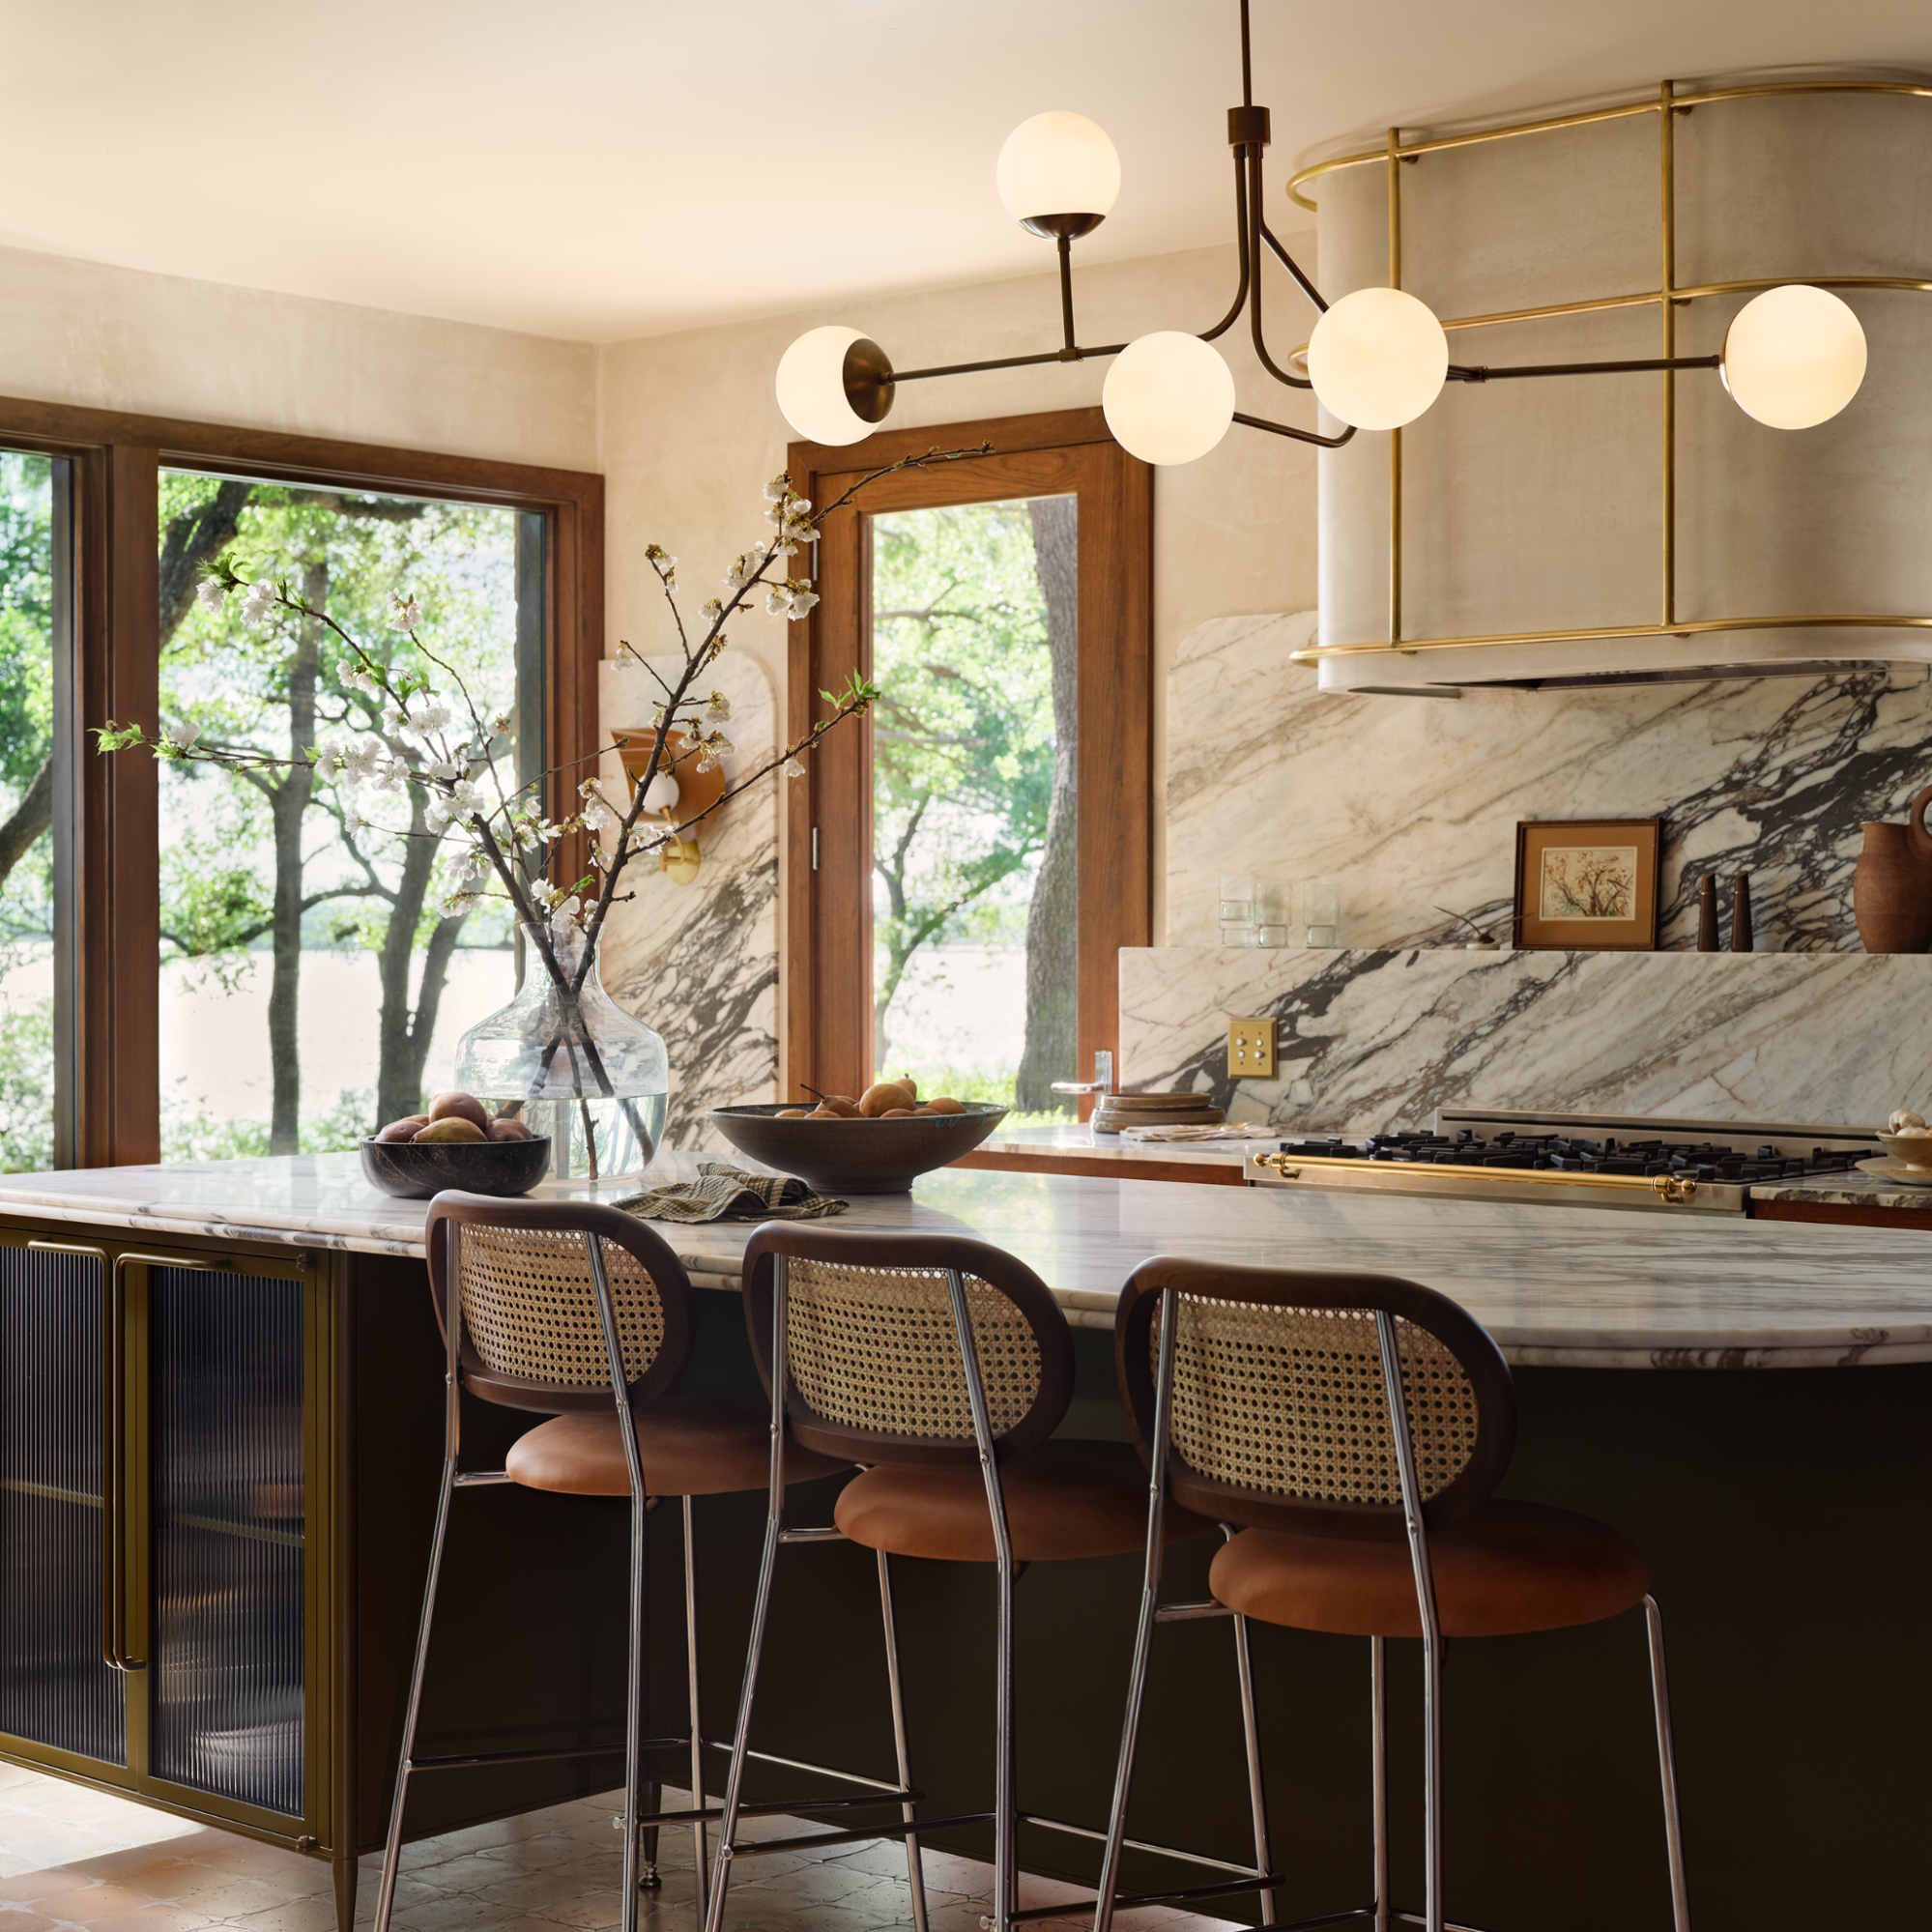 The kitchen of Chip and Jo's project, Fixer Upper: The Lakehouse.